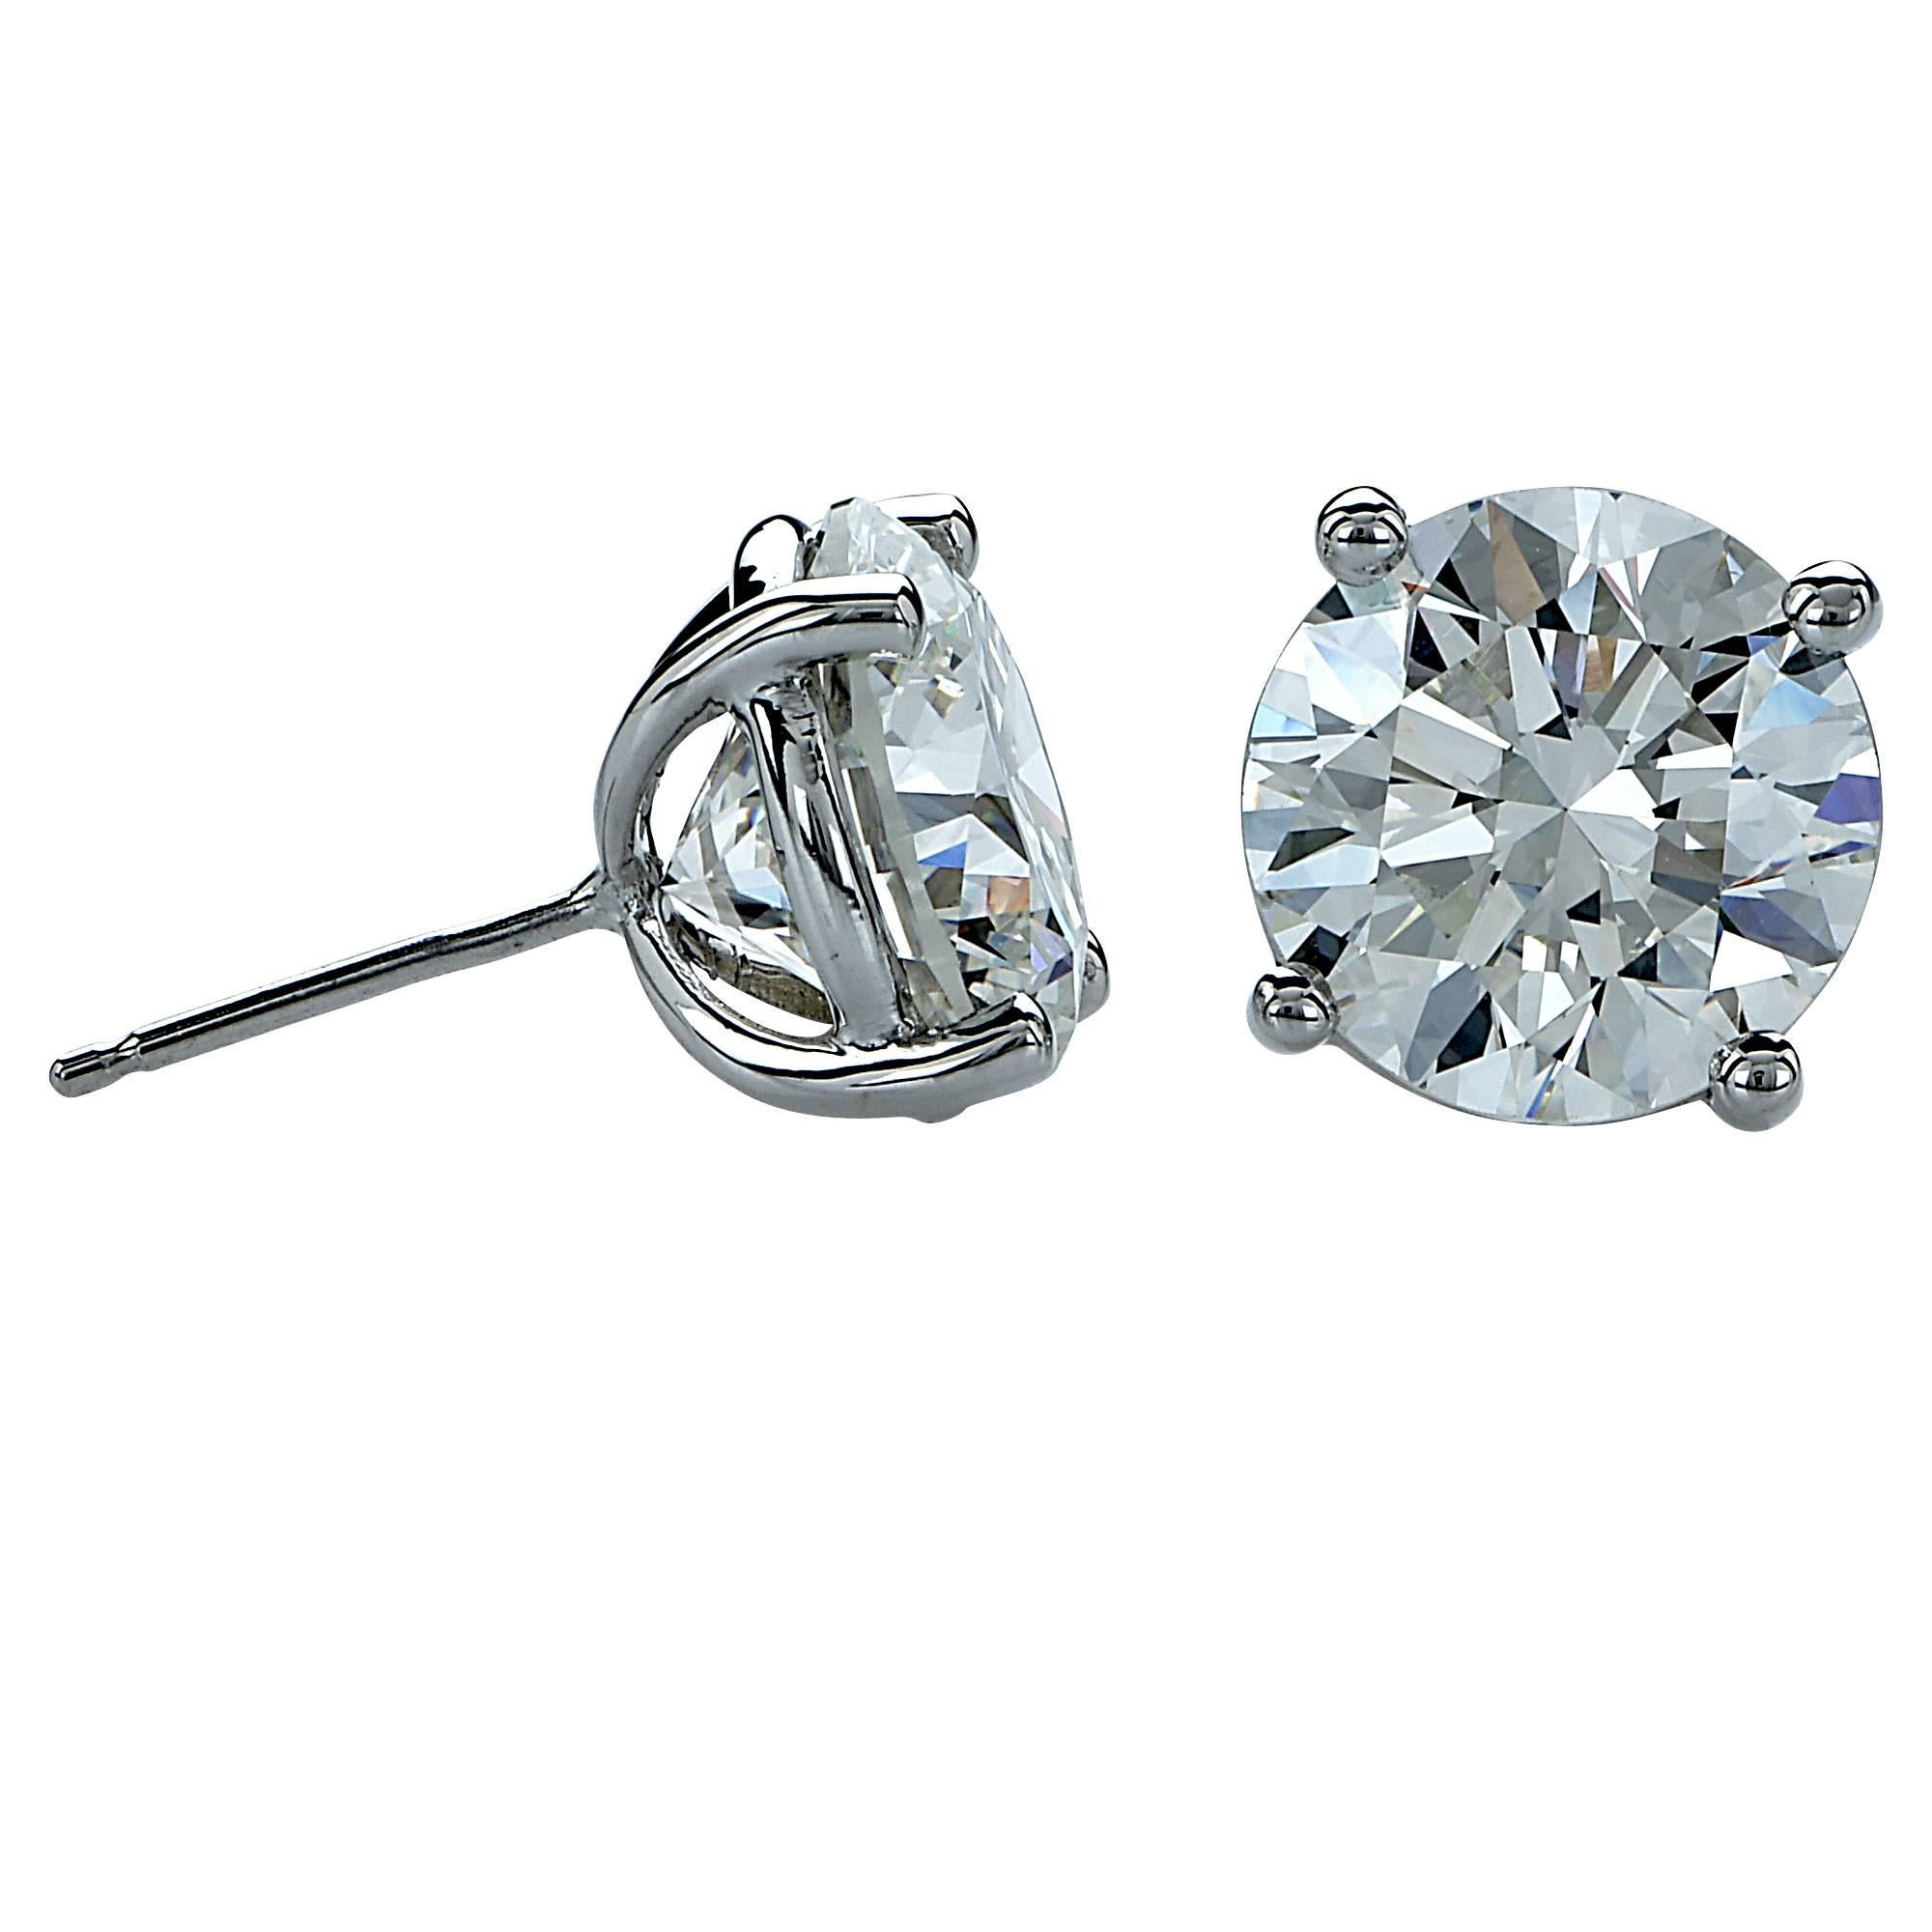 Exquisite, stunning and very rare. These meticulously and perfectly matched pair of round brilliant cut diamonds features a 4.01ct I/VS2 and a 3.99ct I/VS2 both GIA graded. They are set into 18k white gold hand-made solitaire studs. We can forward